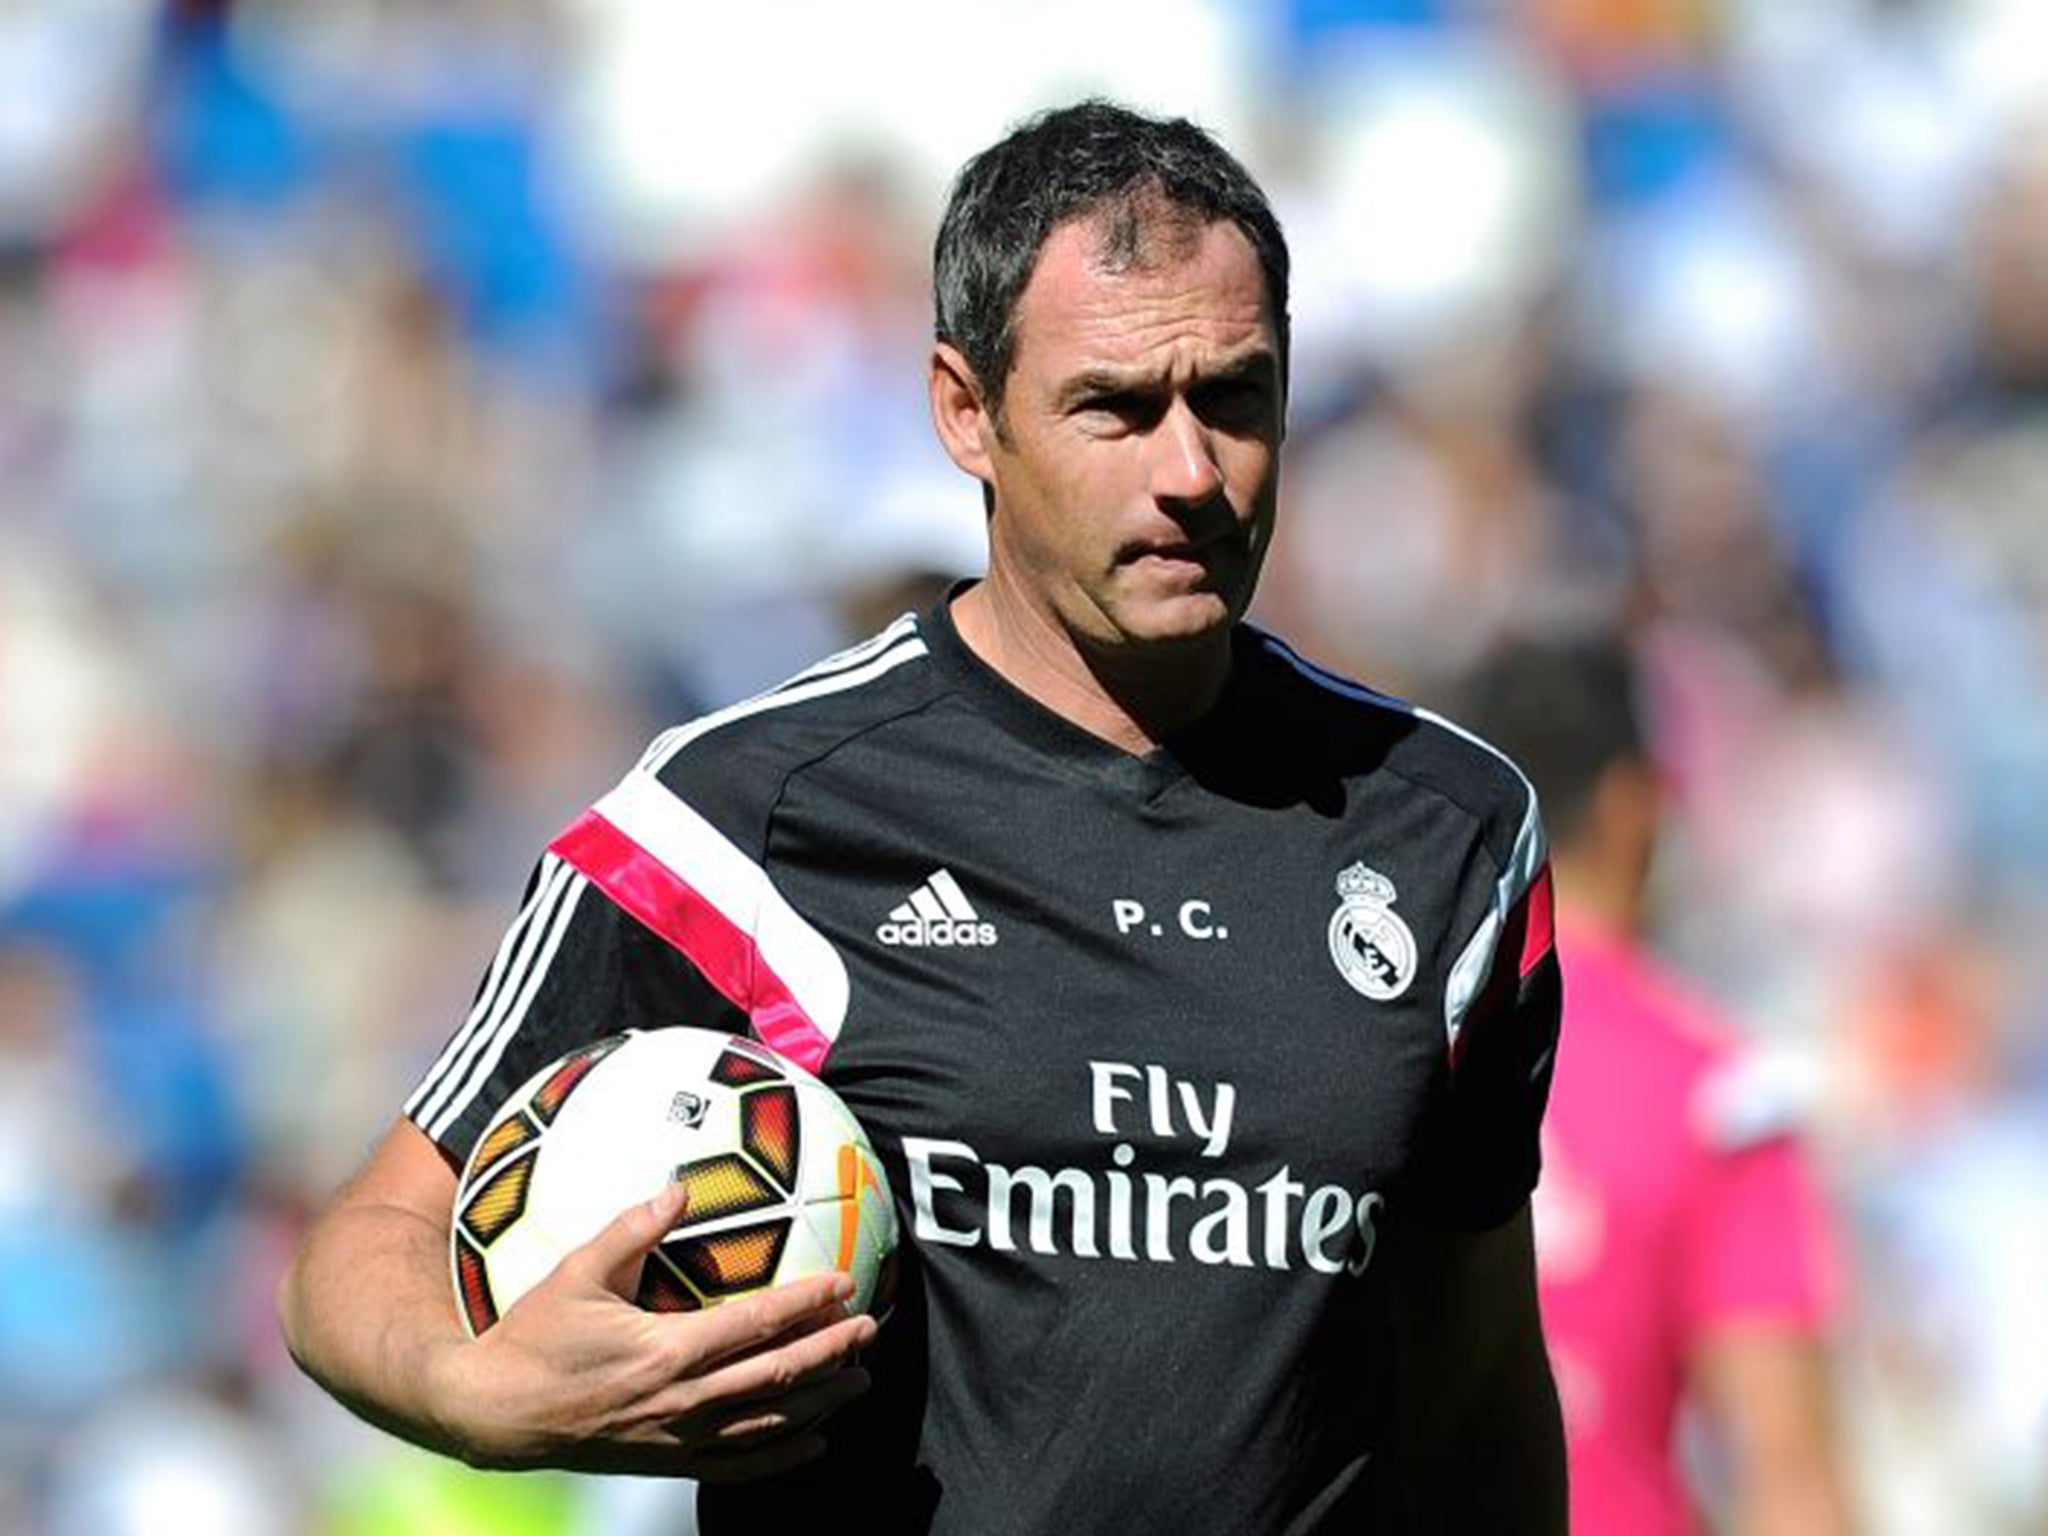 Paul Clement said he received other offers but was soon persuaded to join ambitious Derby County